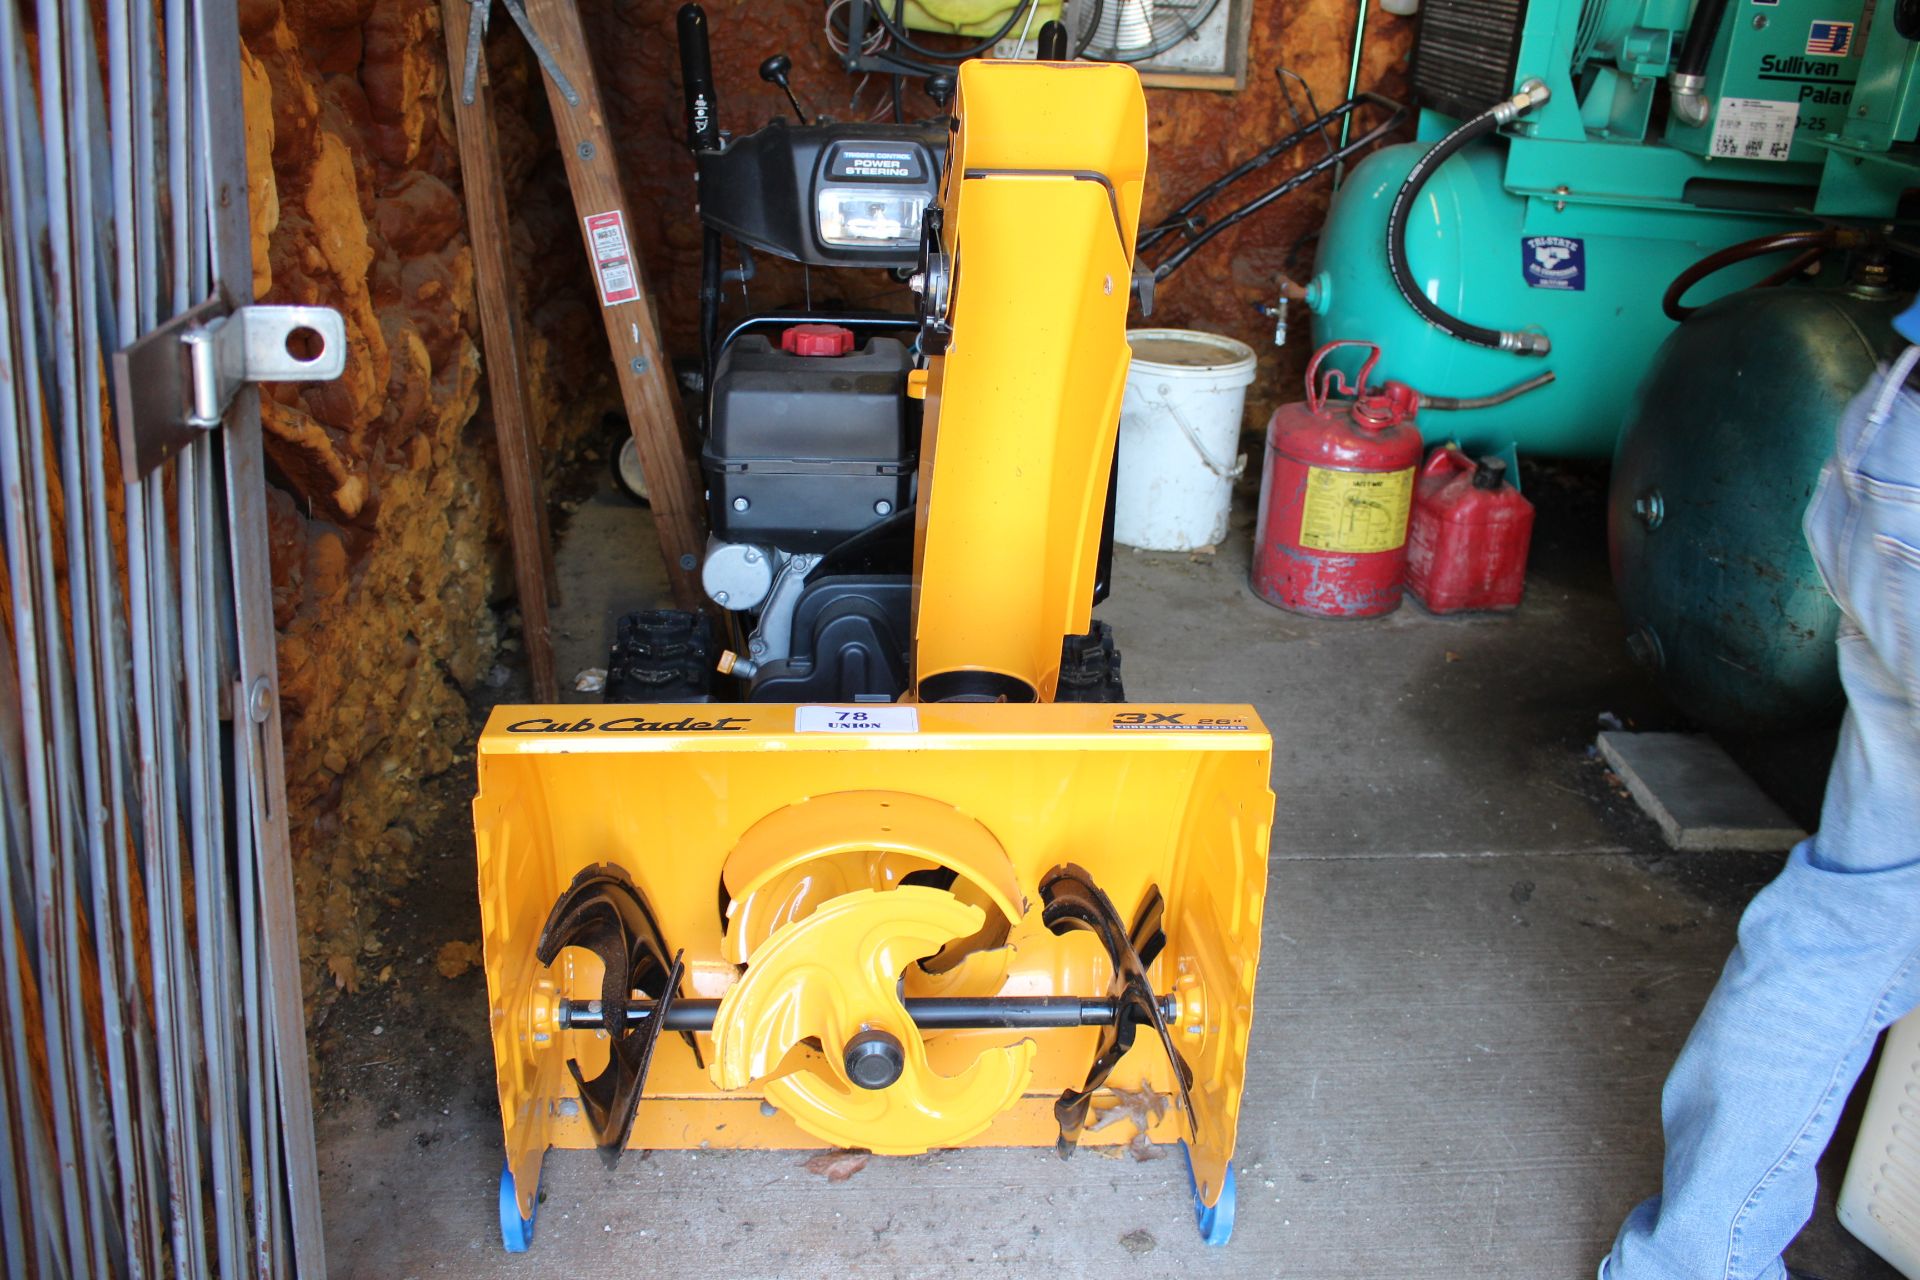 Asset 78 - Cub Cadet 3-stage 26" snow blower, Rigging $75 - Image 2 of 2